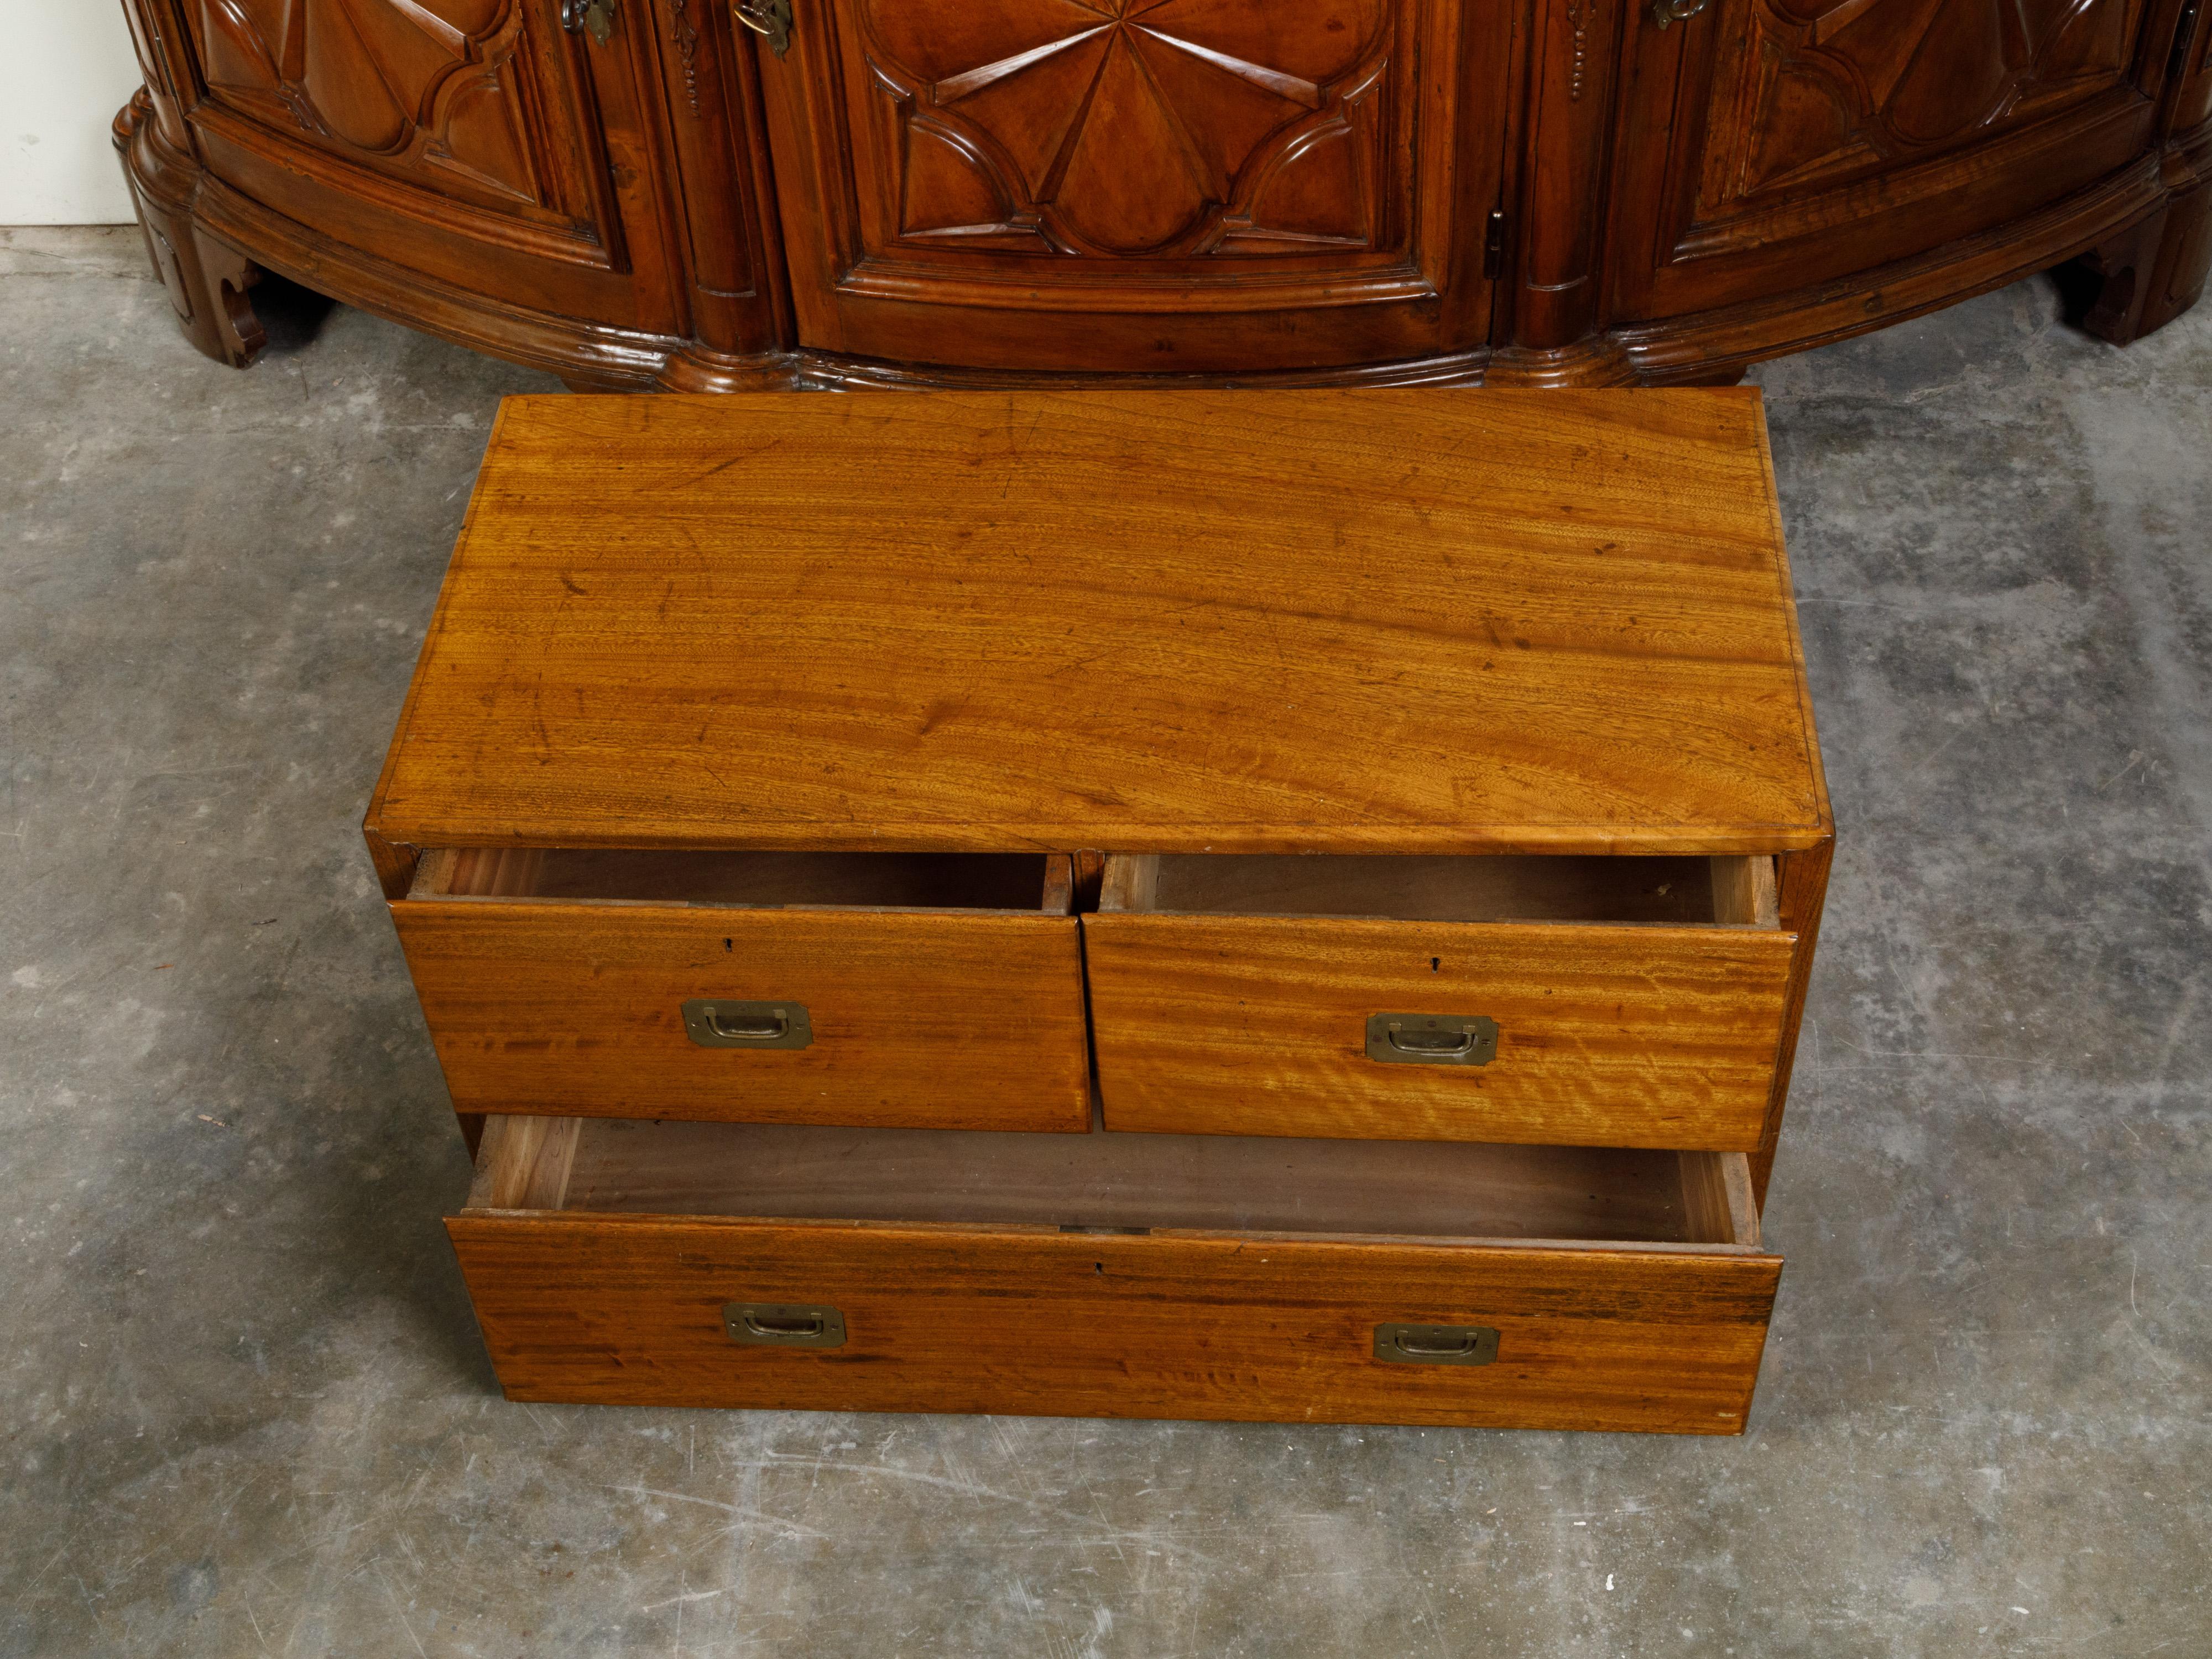 English Campaign 19th Century Camphor Wood Low Chest with Inset Brass Hardware In Good Condition For Sale In Atlanta, GA